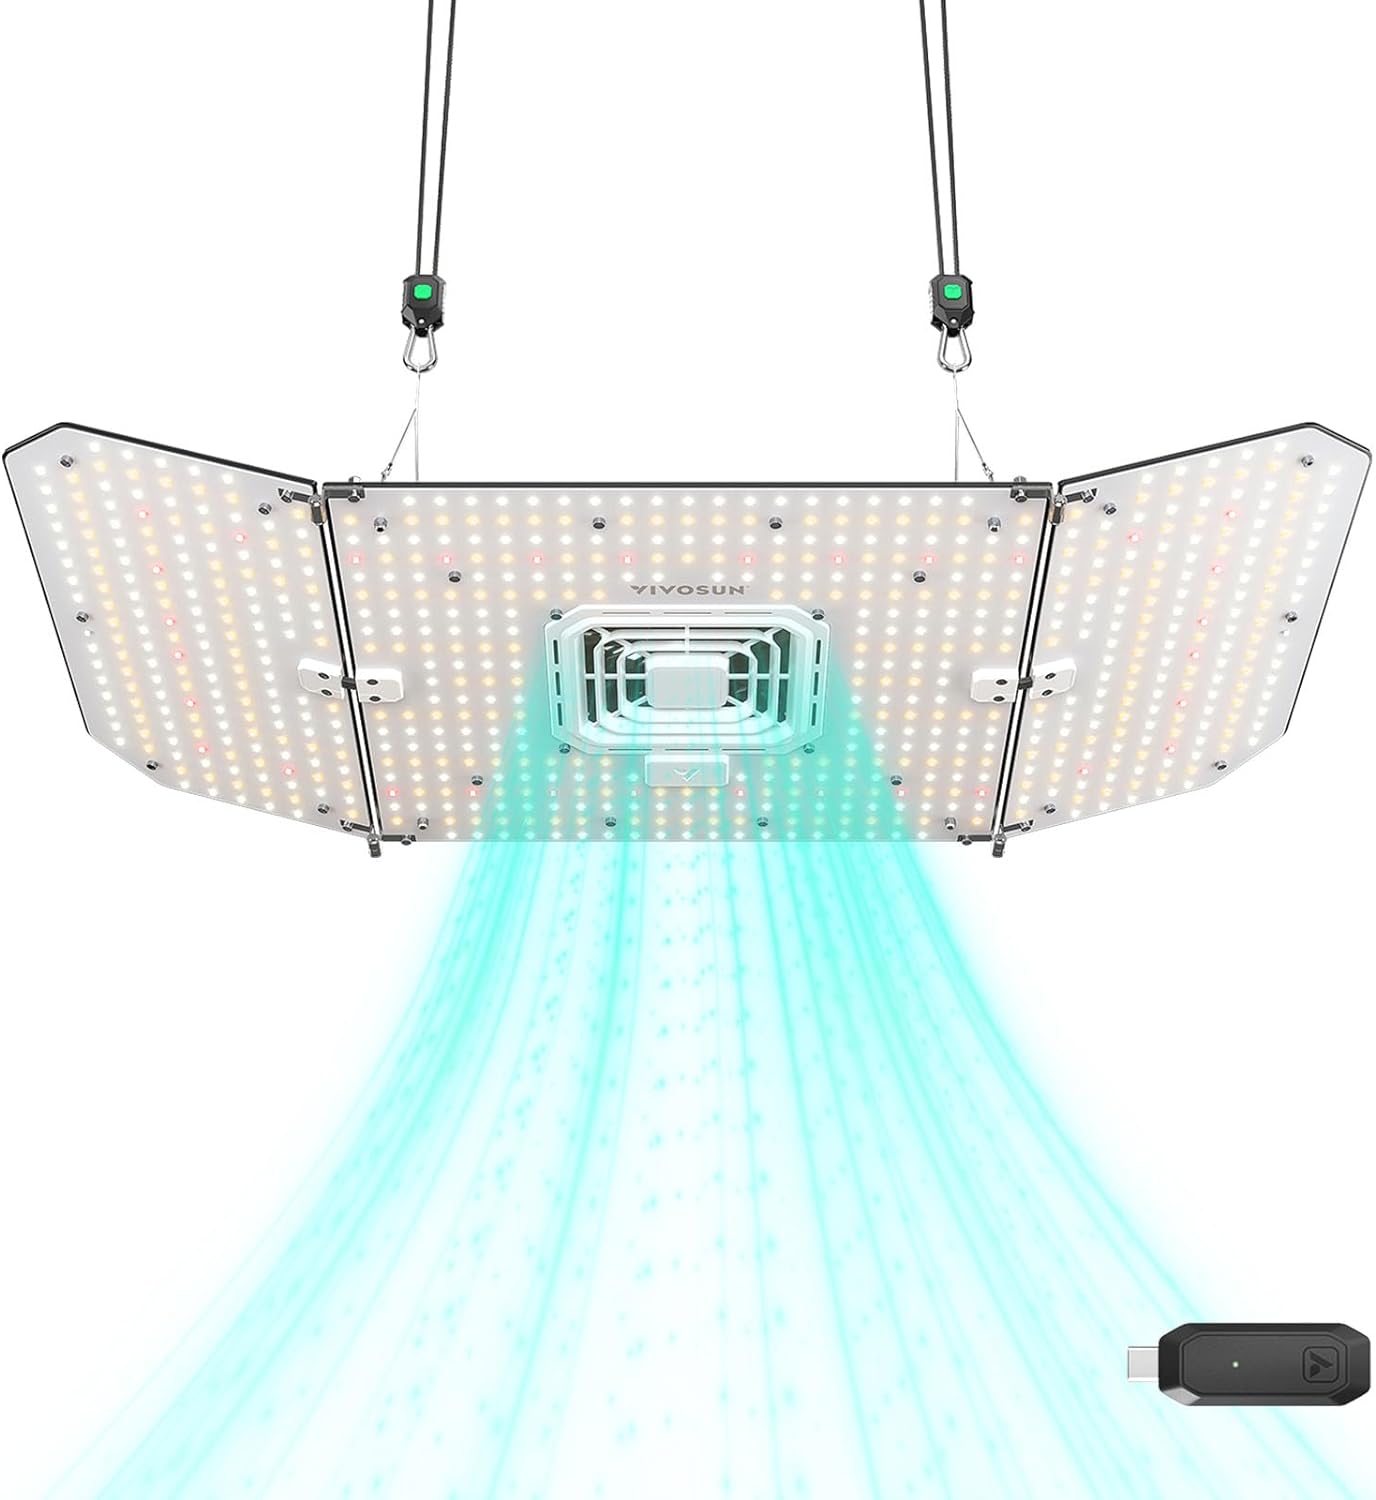 VIVOSUN AeroLight Wing AW200SE, LED Grow Light 200W with Integrated Circulation Fan  GrowHub Controller E25, Compatible with App  E42A, 3x3 Ft. Coverage, Establish an Intelligent Grow Environment